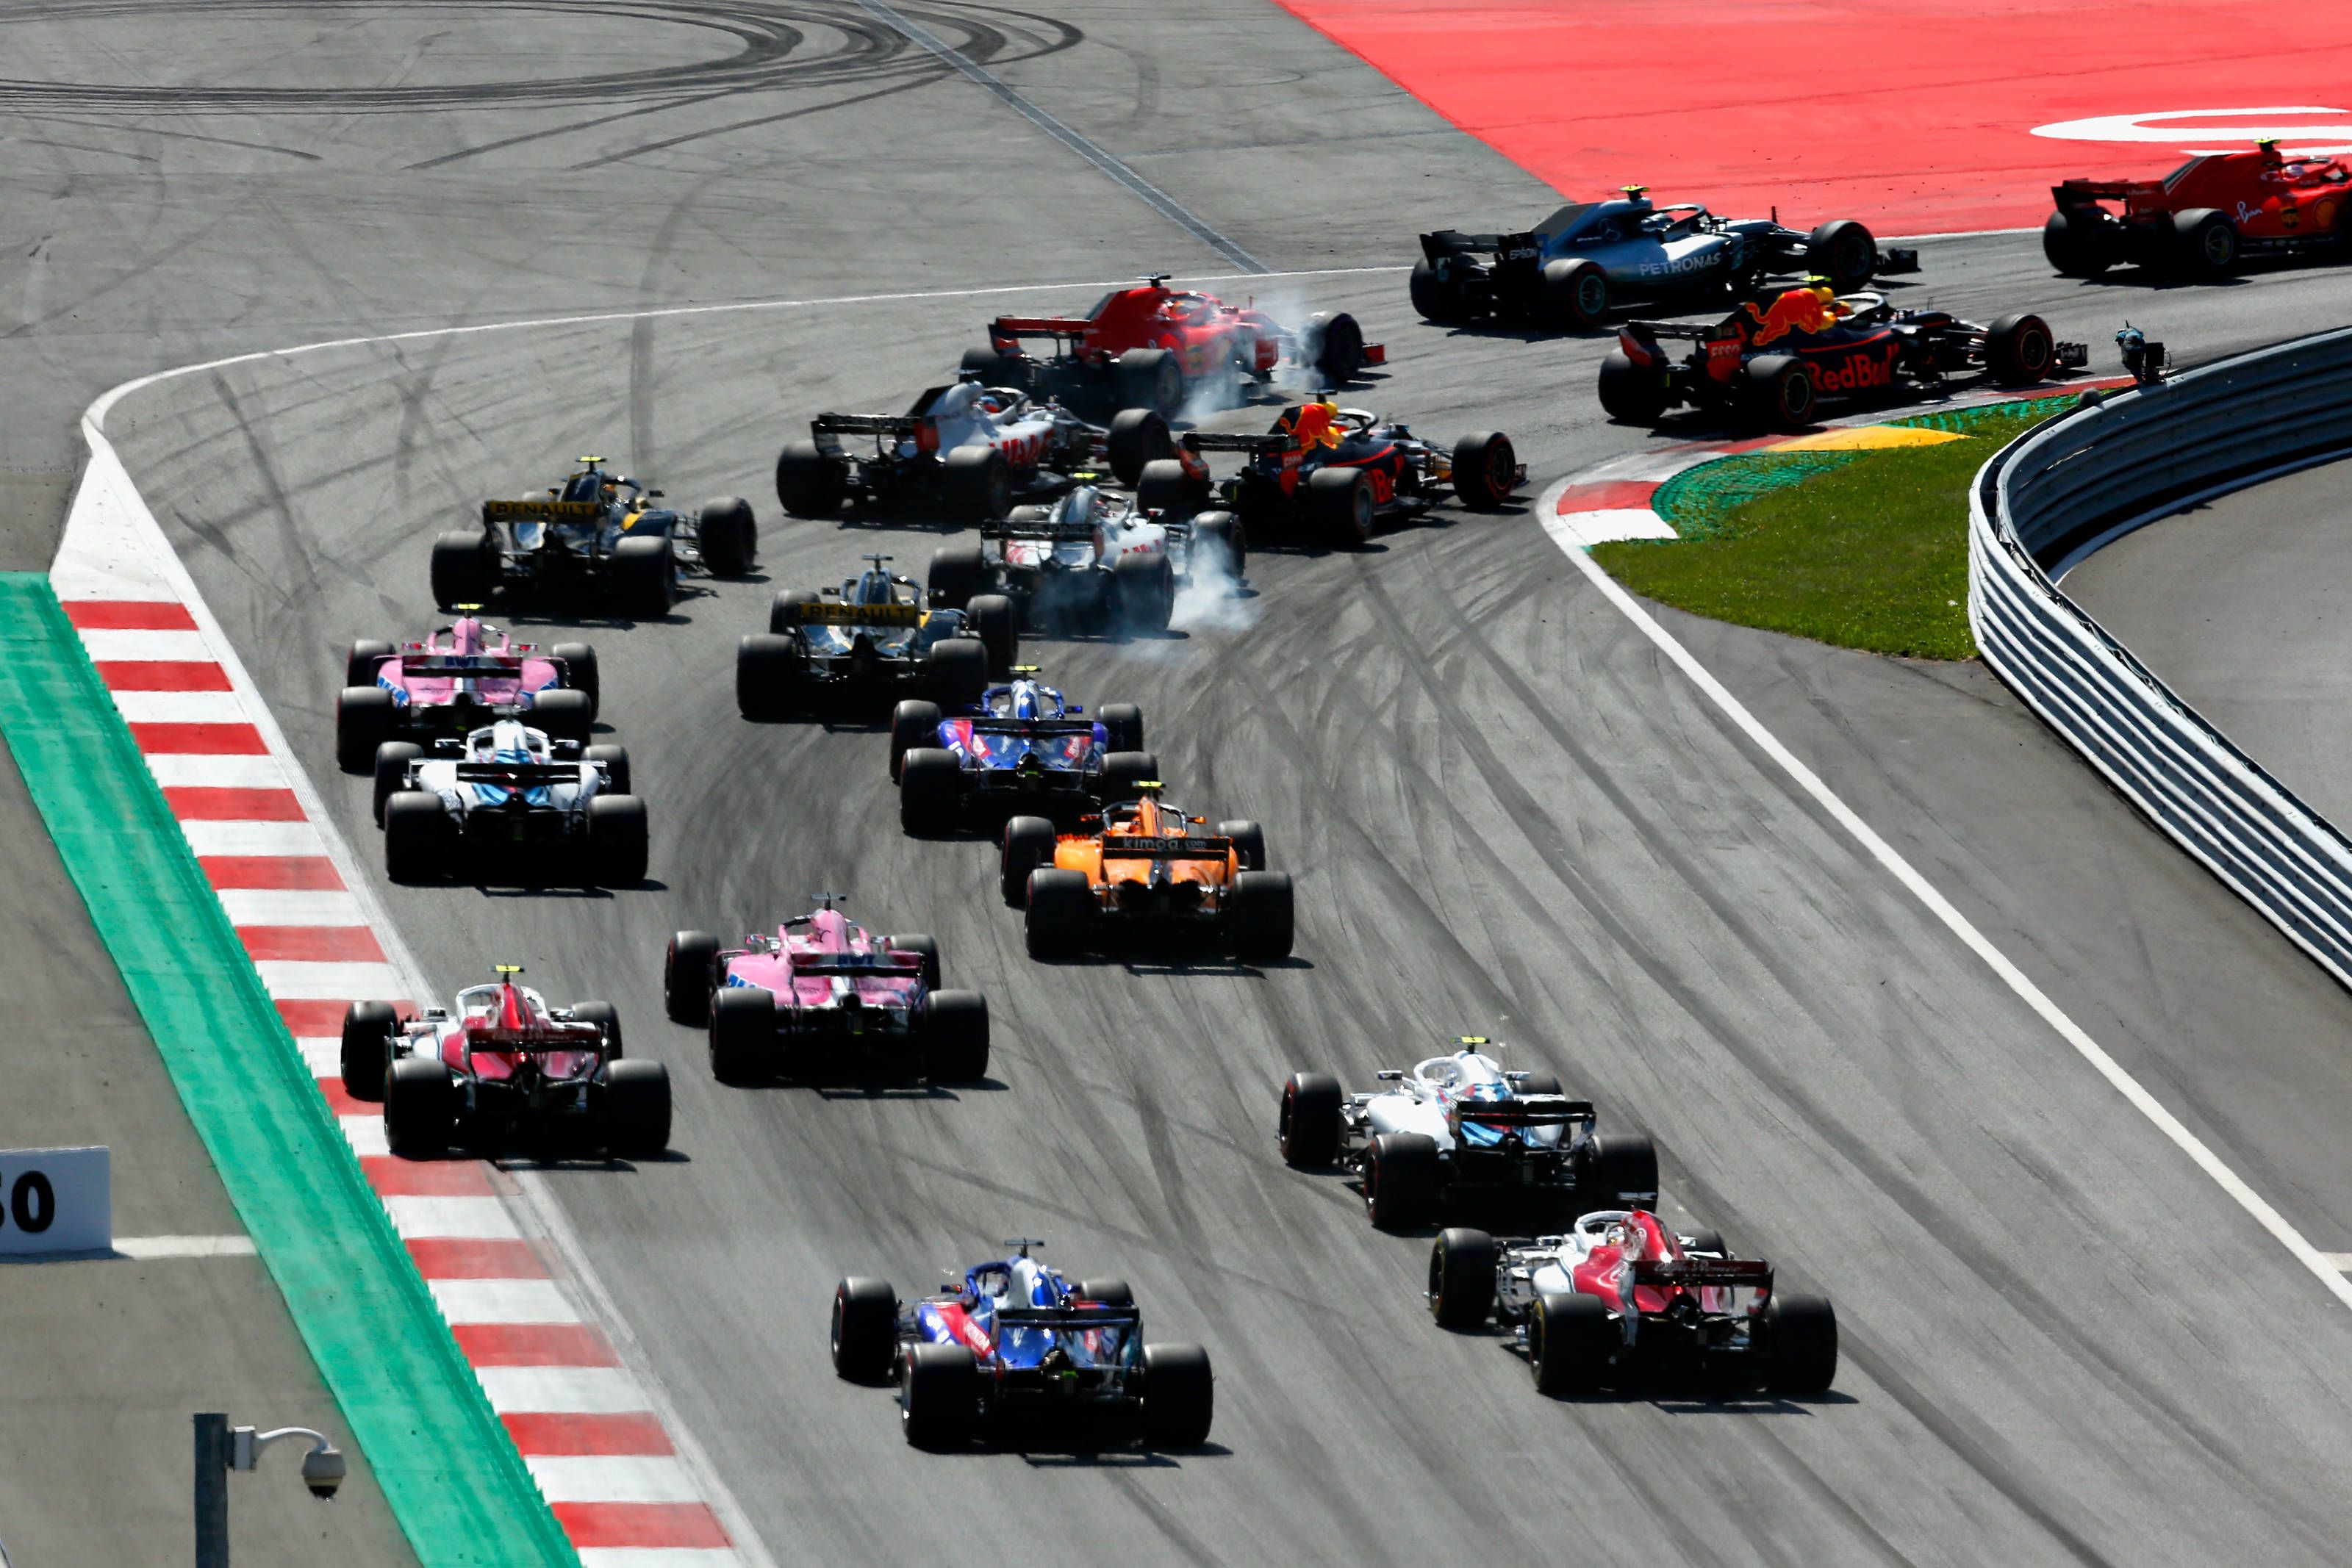 F1 posts increased TV and digital audience for 2018 season